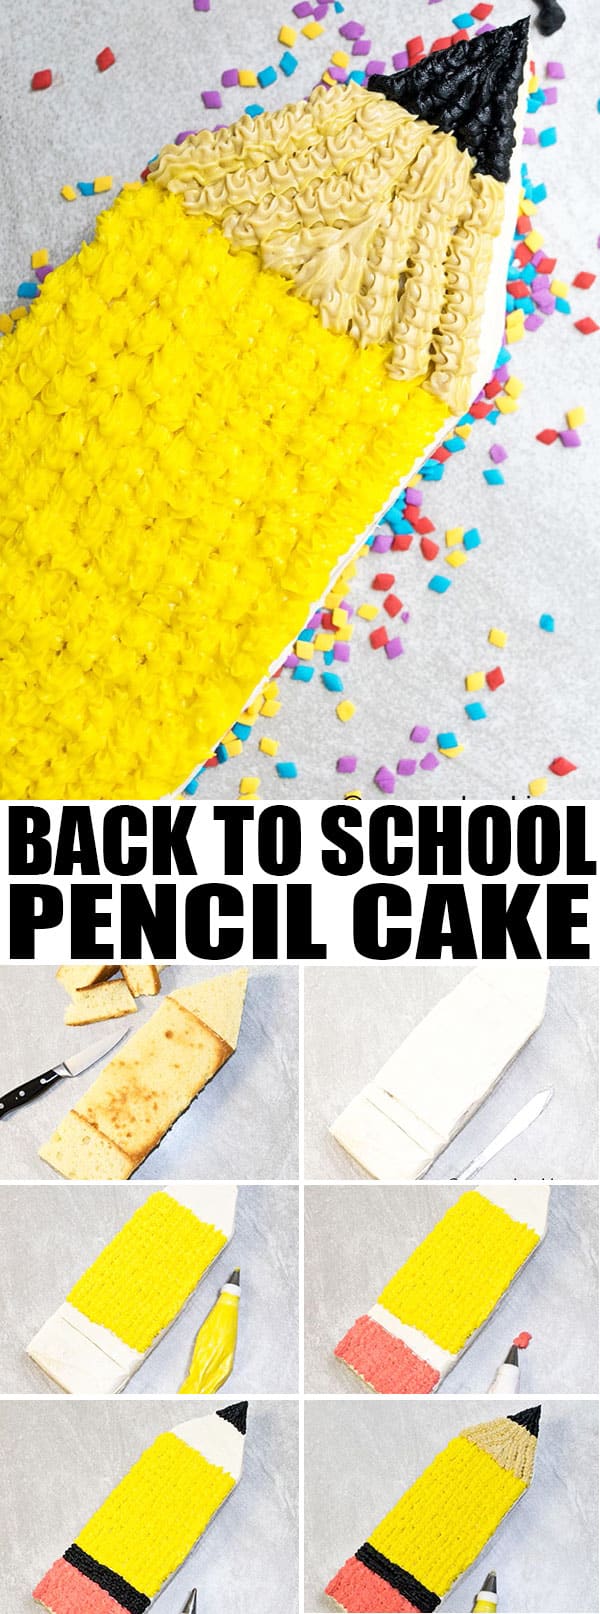 Collage Image With Step by Step Pictures on How to Make Back To School Pencil Cake